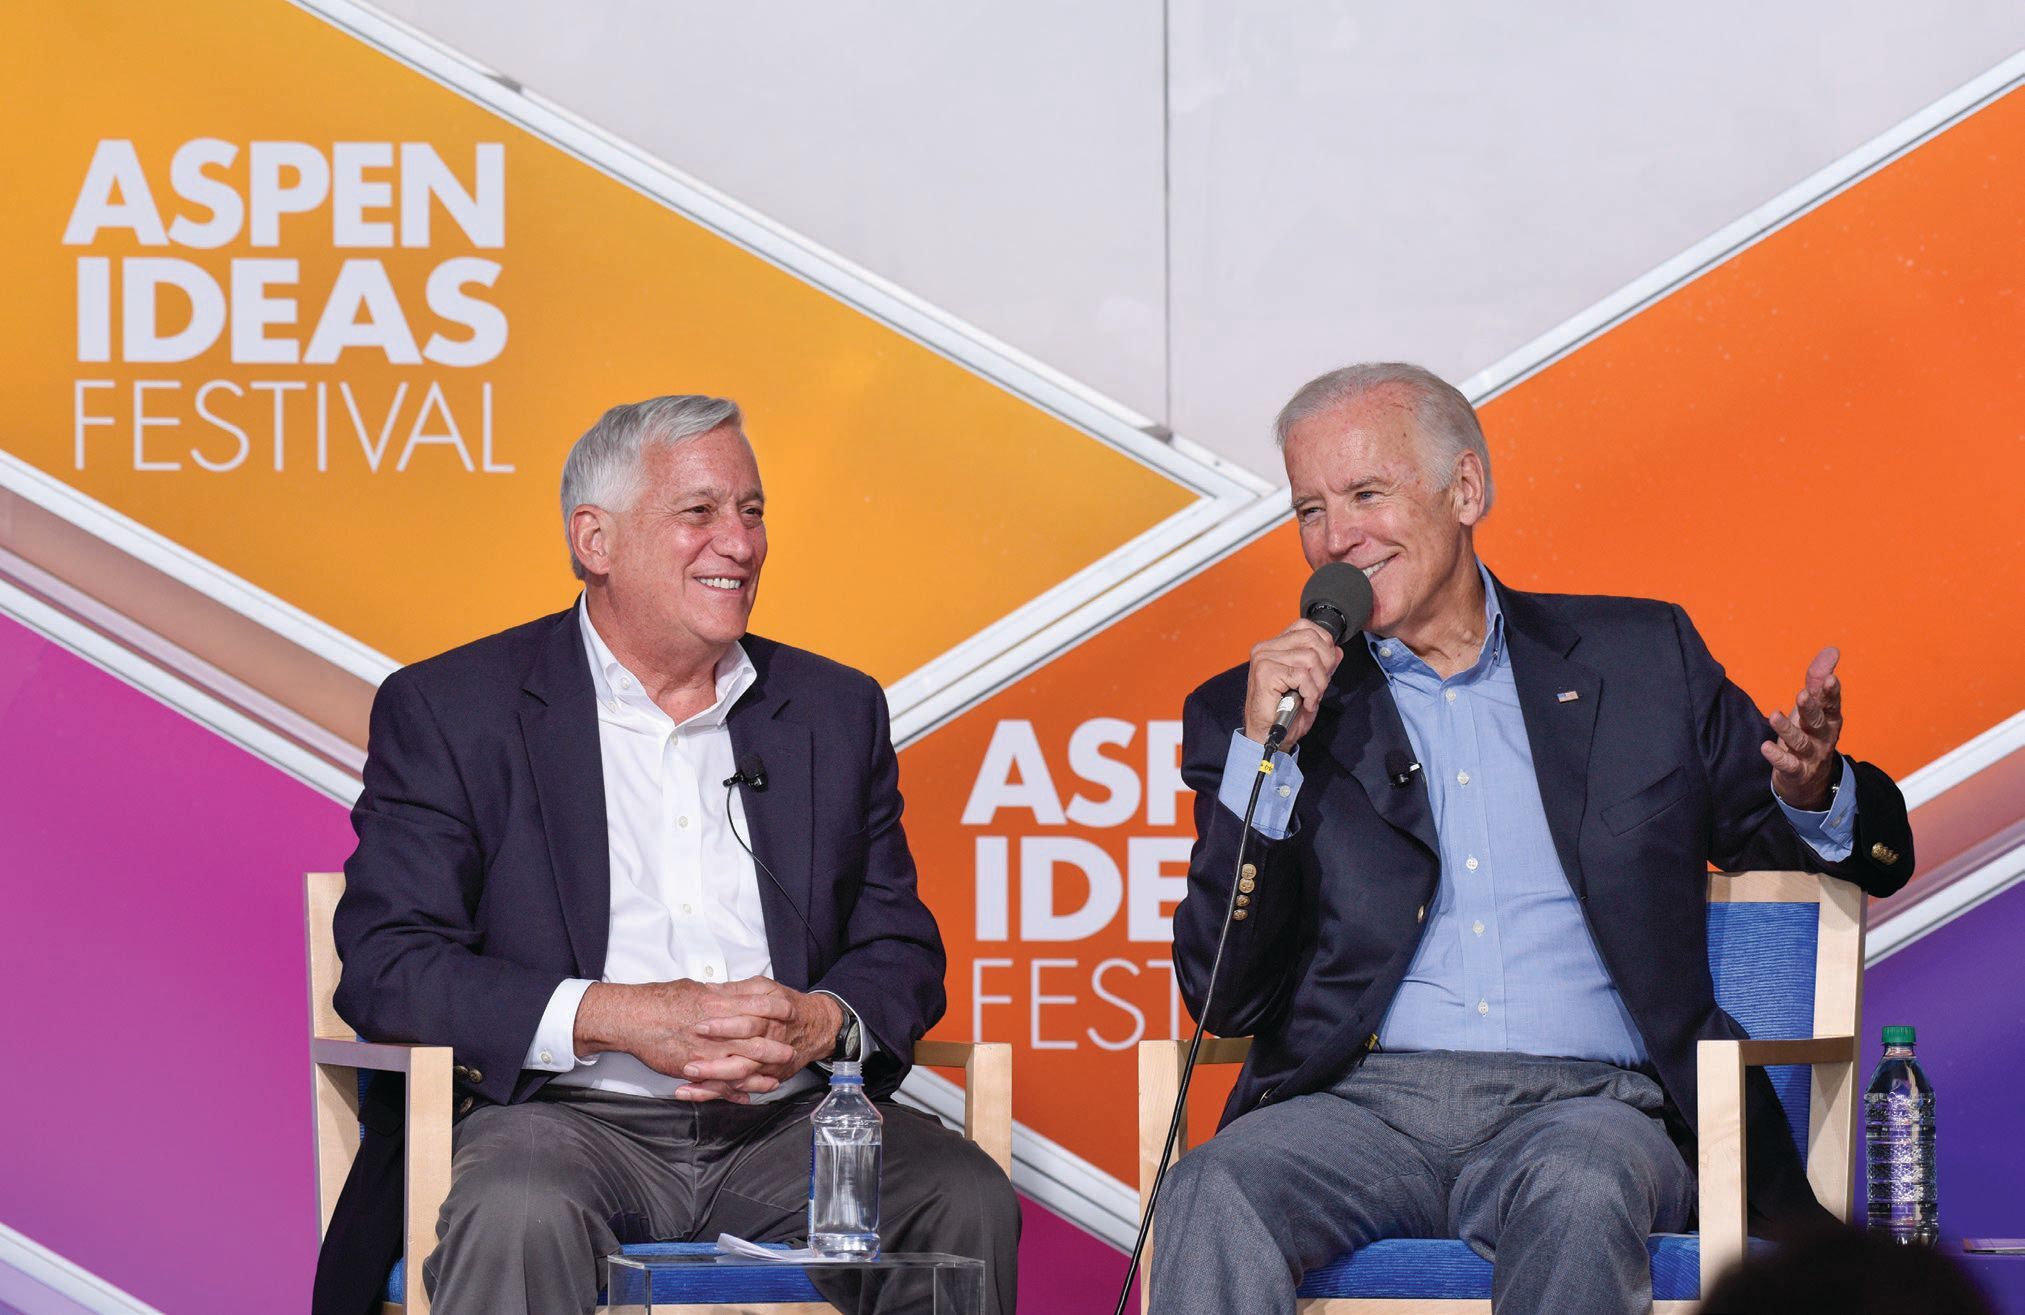 President Joe Biden speaks with Walter Isaacson during the 2016 Aspen Ideas Festival. Opposite: Isaacson and Bill Gates attend “ A Conversation with Bill Gates” on day 4 of Aspen Ideas Festival 2010 on July 8, 2010. PHOTO COURTESY OF THE ASPEN INSTITUTE